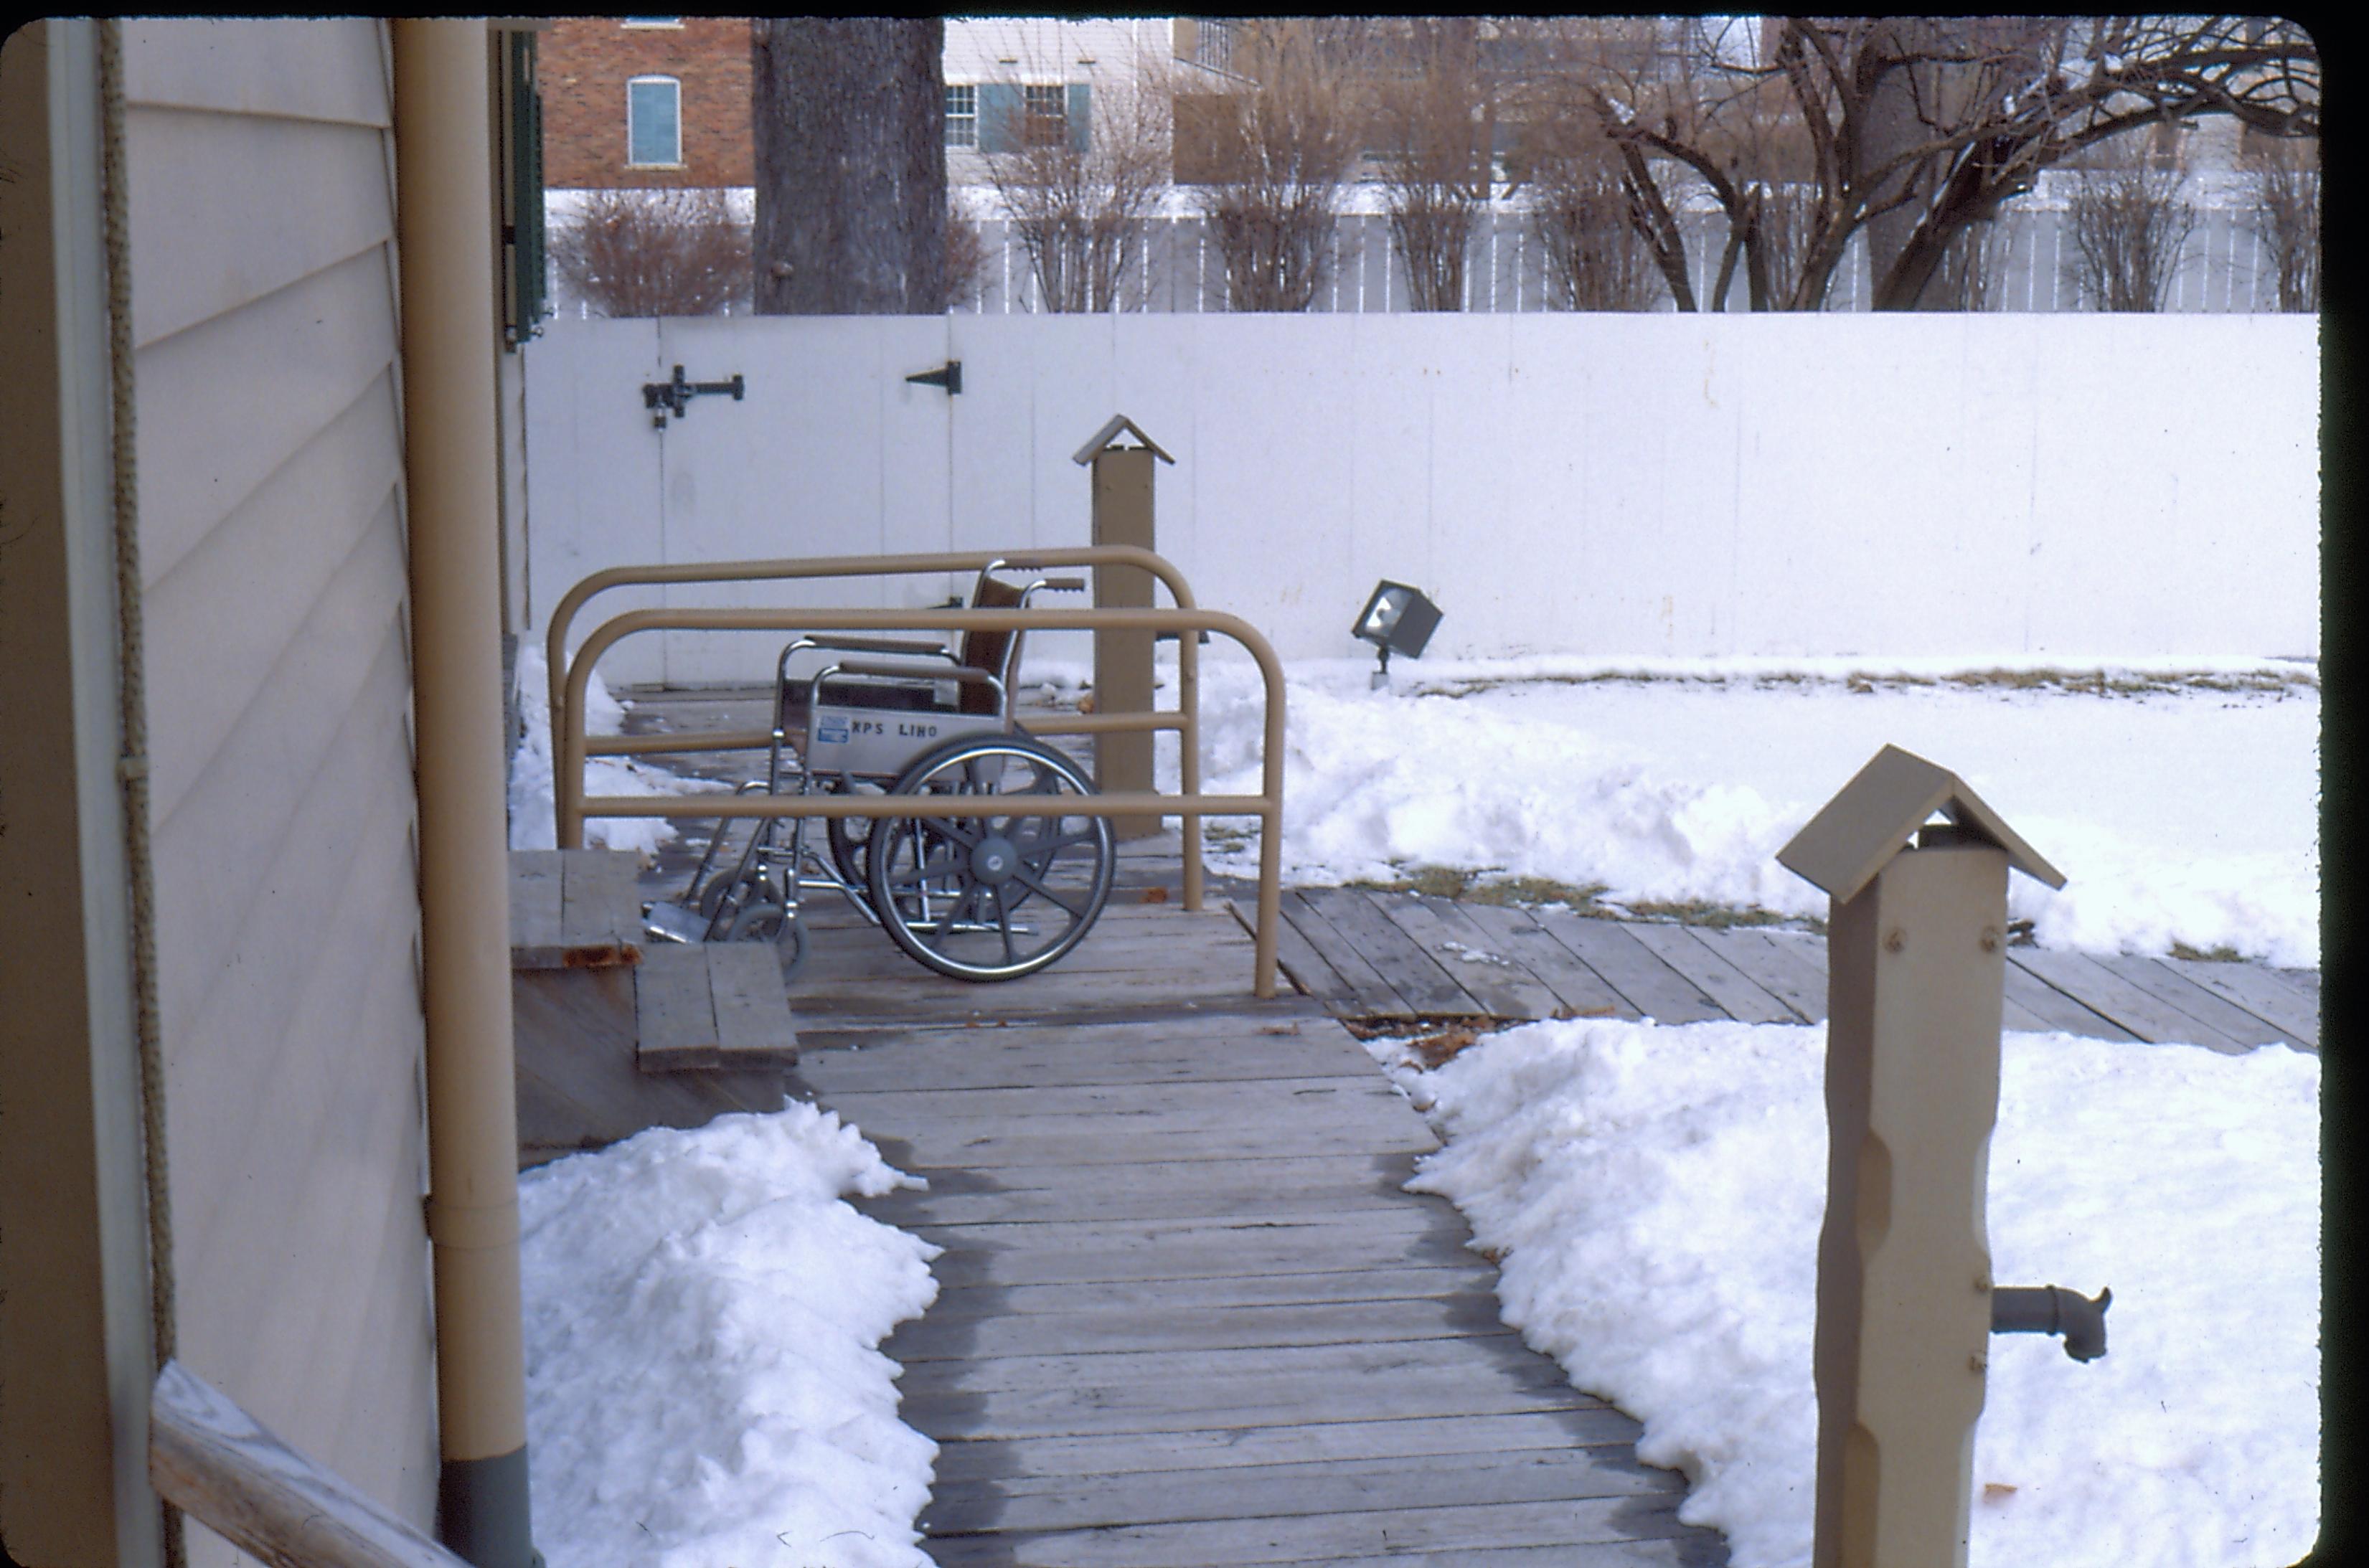 View of the Lincoln Home wheelchair lift, with empty wheelchair and rails. Snow on the ground. Photographer facing north.